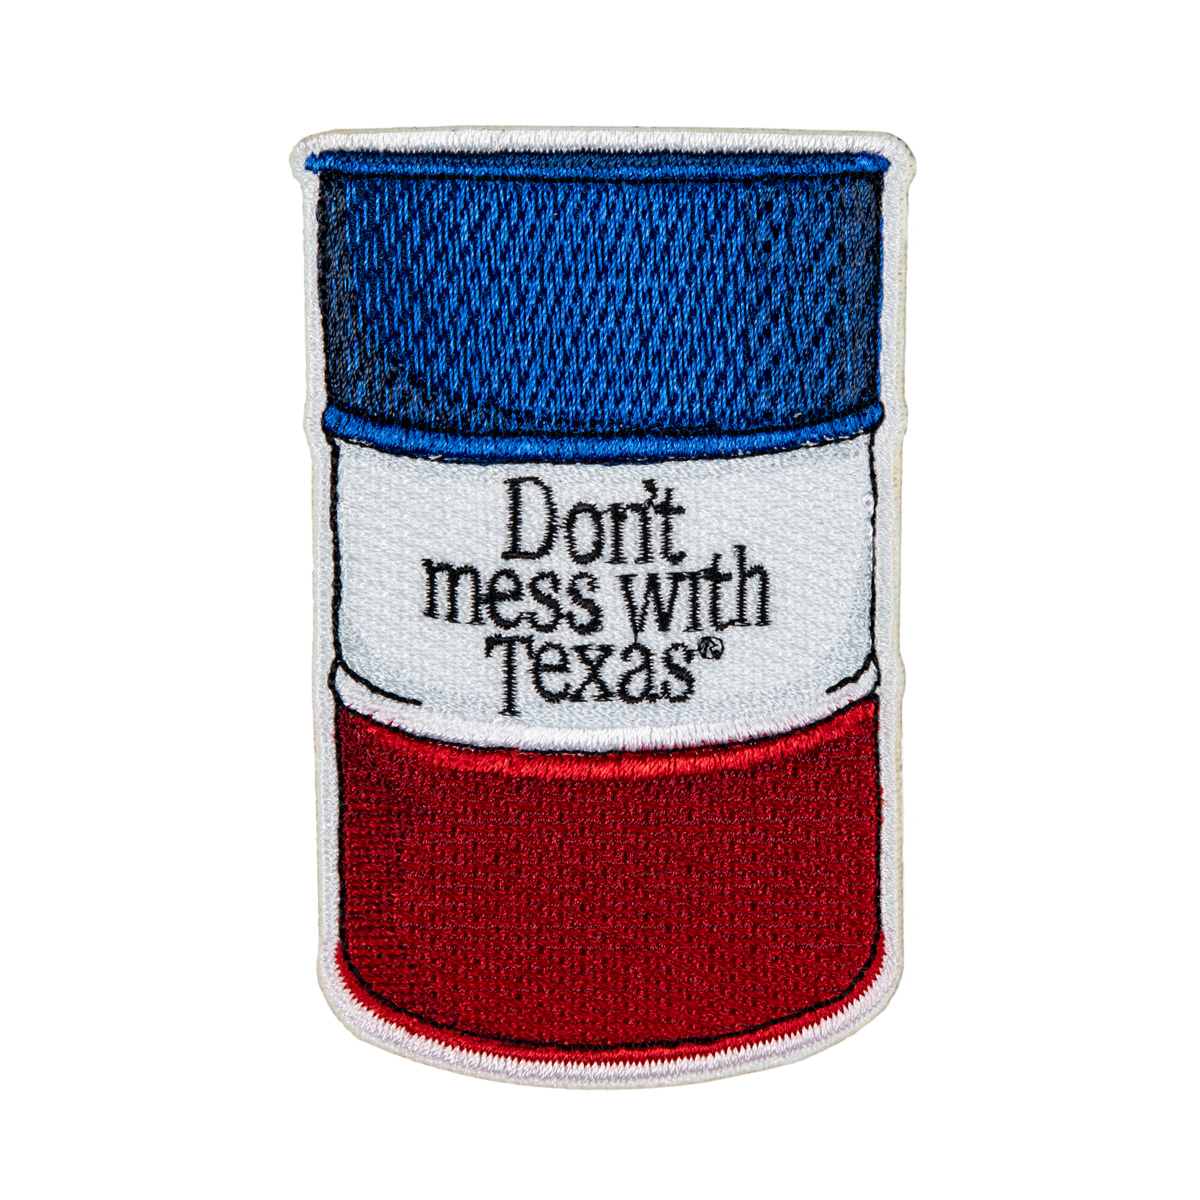 Don't mess with Texas Barrel Patch